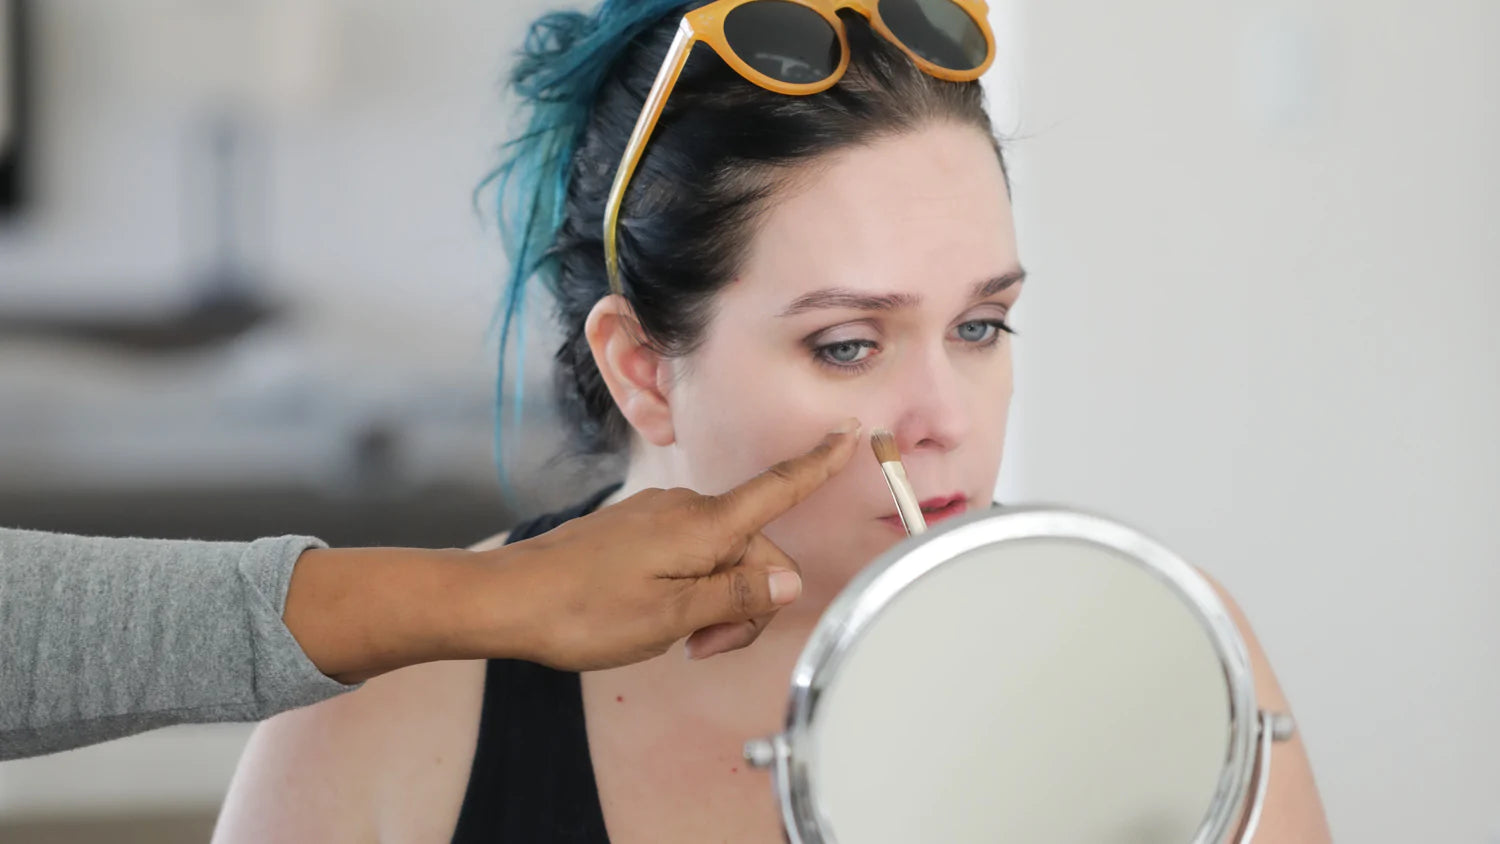 Woman looking in mirror while applying makeup.